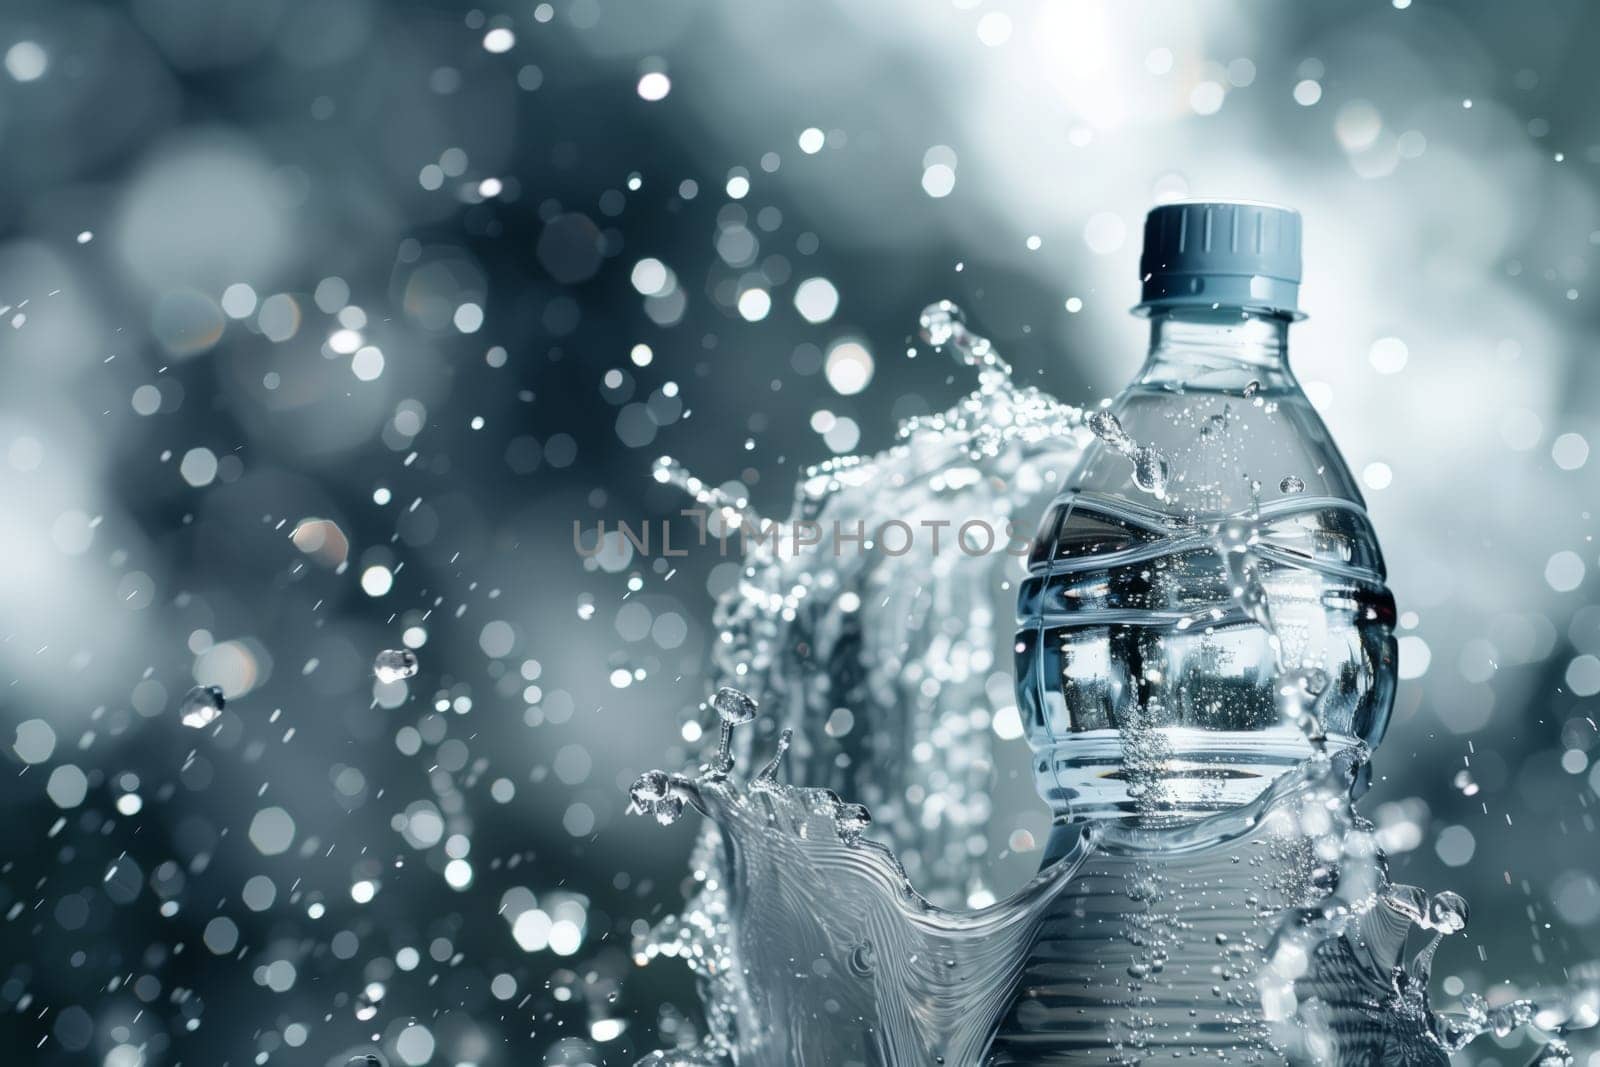 a bottle of water is splashing into a glass by richwolf